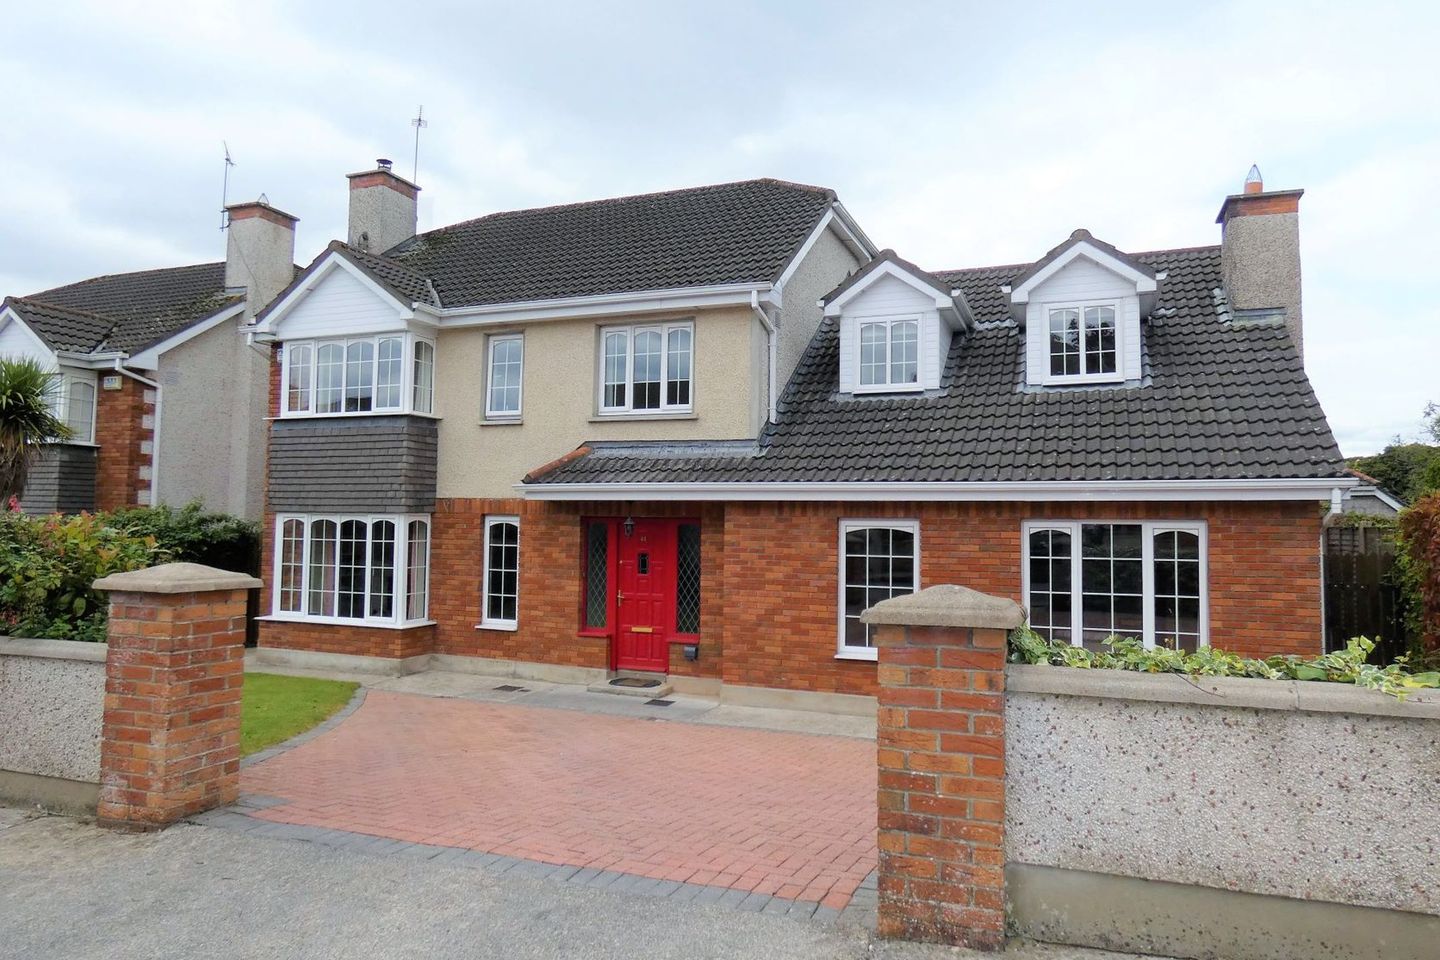 44 The Hazels, Oakleigh Wood, Ennis, Co. Clare